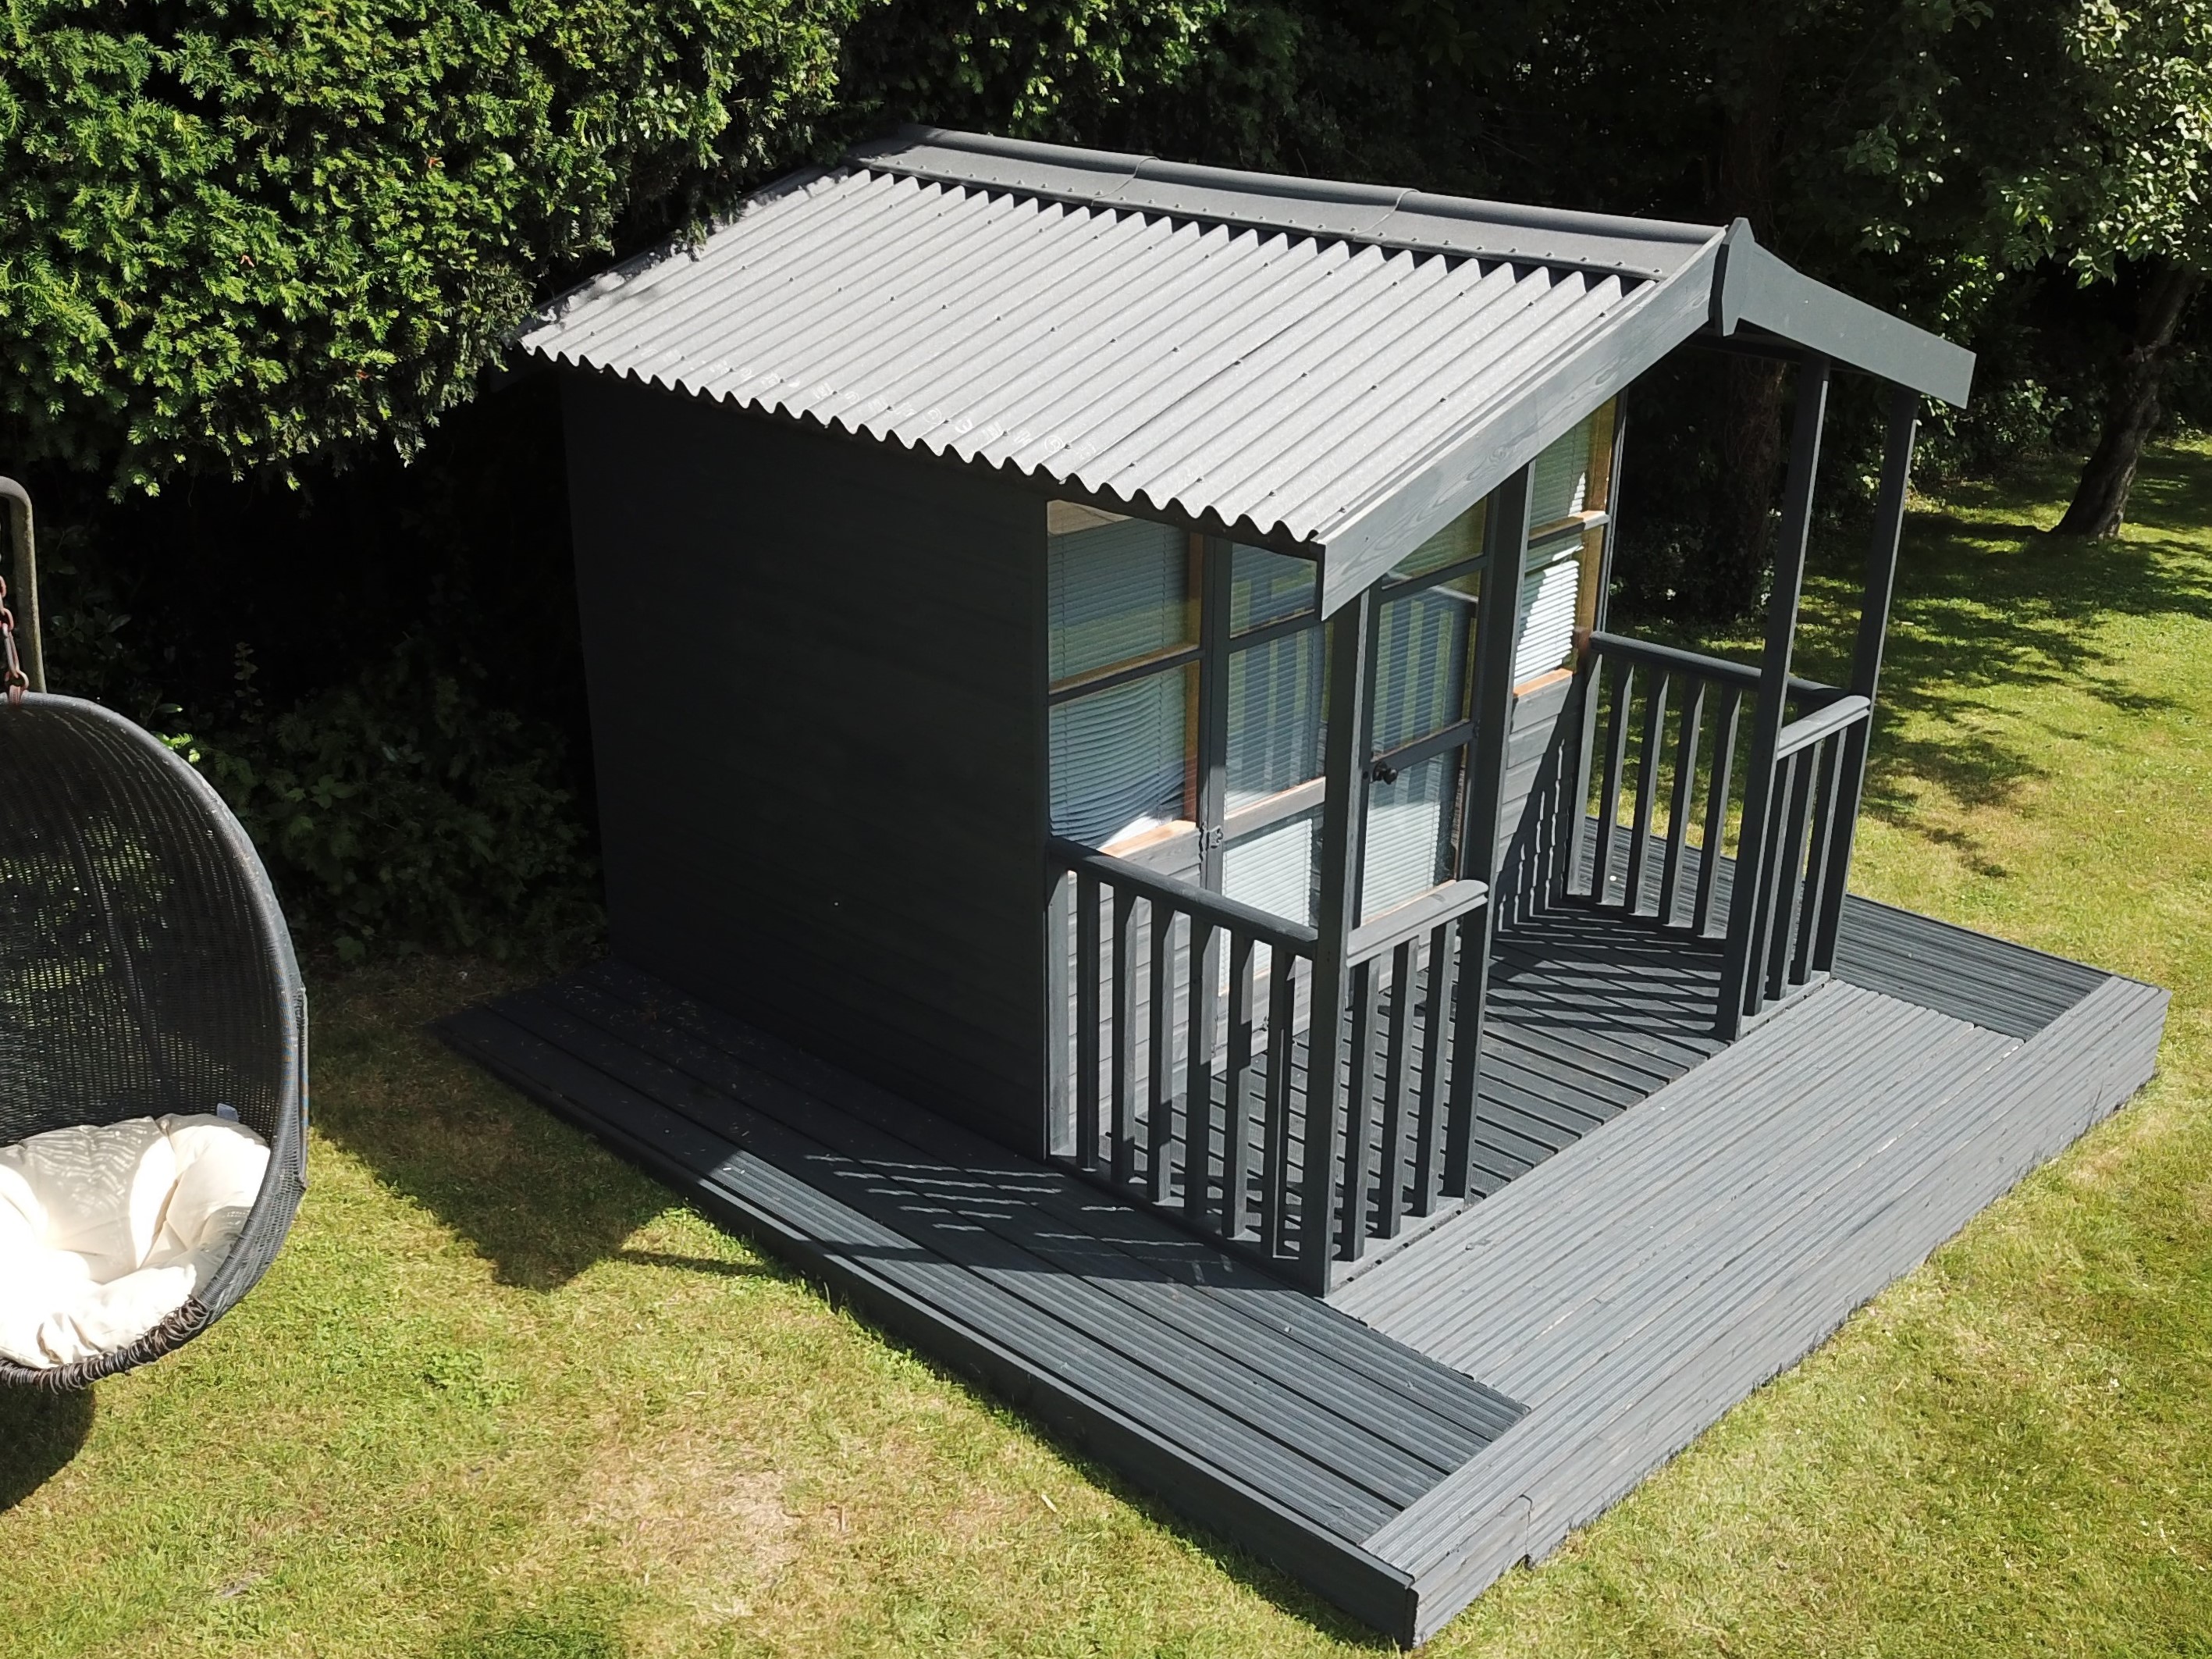 Grey ONDULINE CLASSIC roofing sheets on grey shed/summerhouse